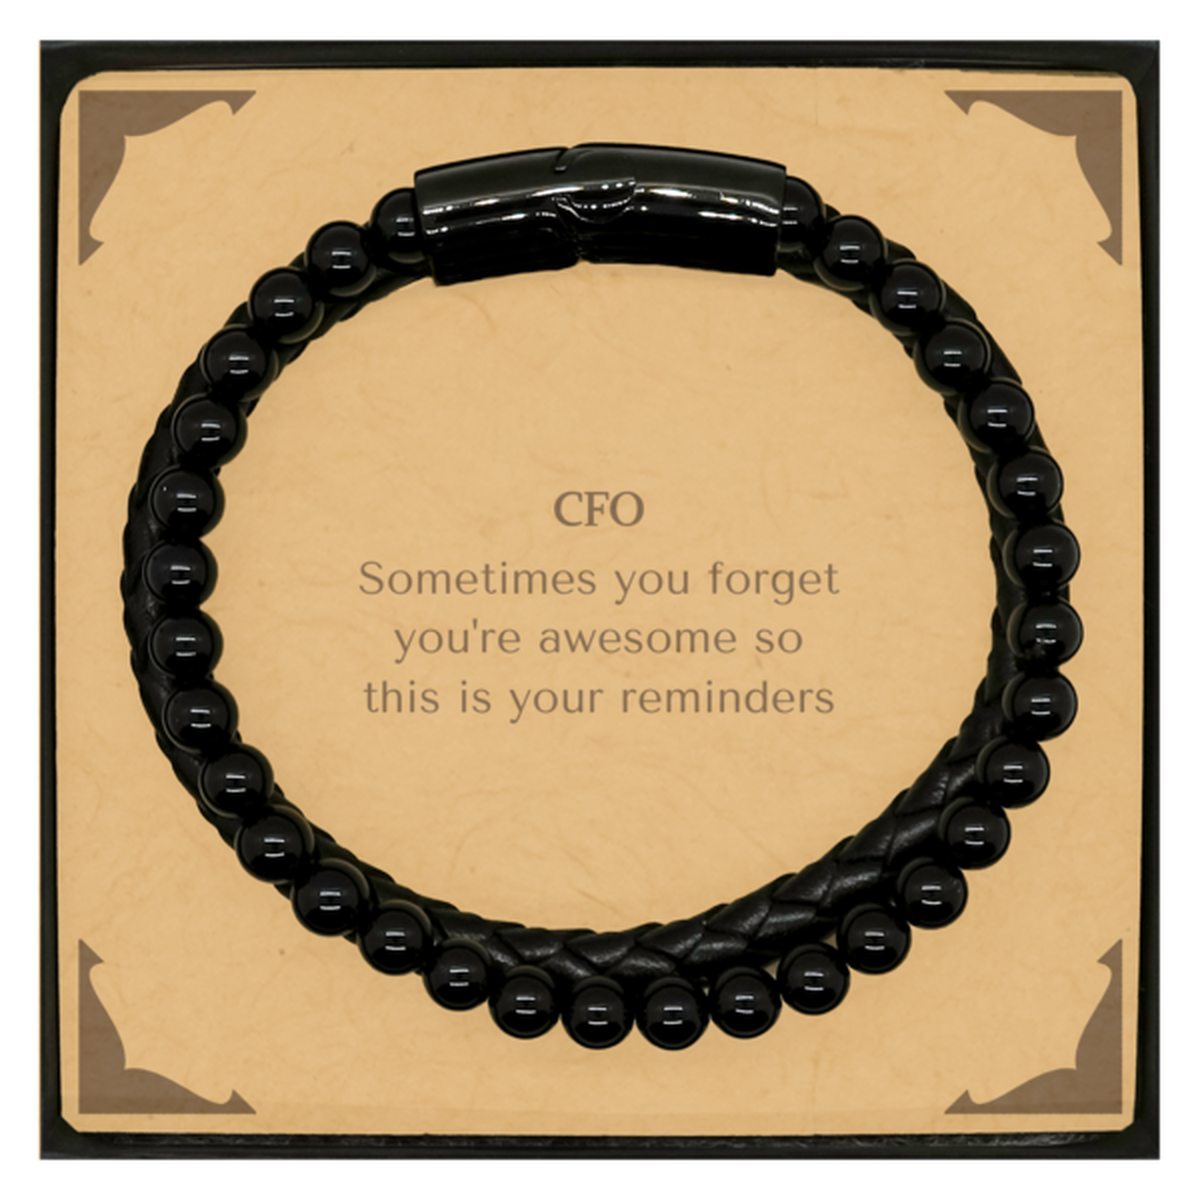 Sentimental CFO Stone Leather Bracelets, CFO Sometimes you forget you're awesome so this is your reminders, Graduation Christmas Birthday Gifts for CFO, Men, Women, Coworkers